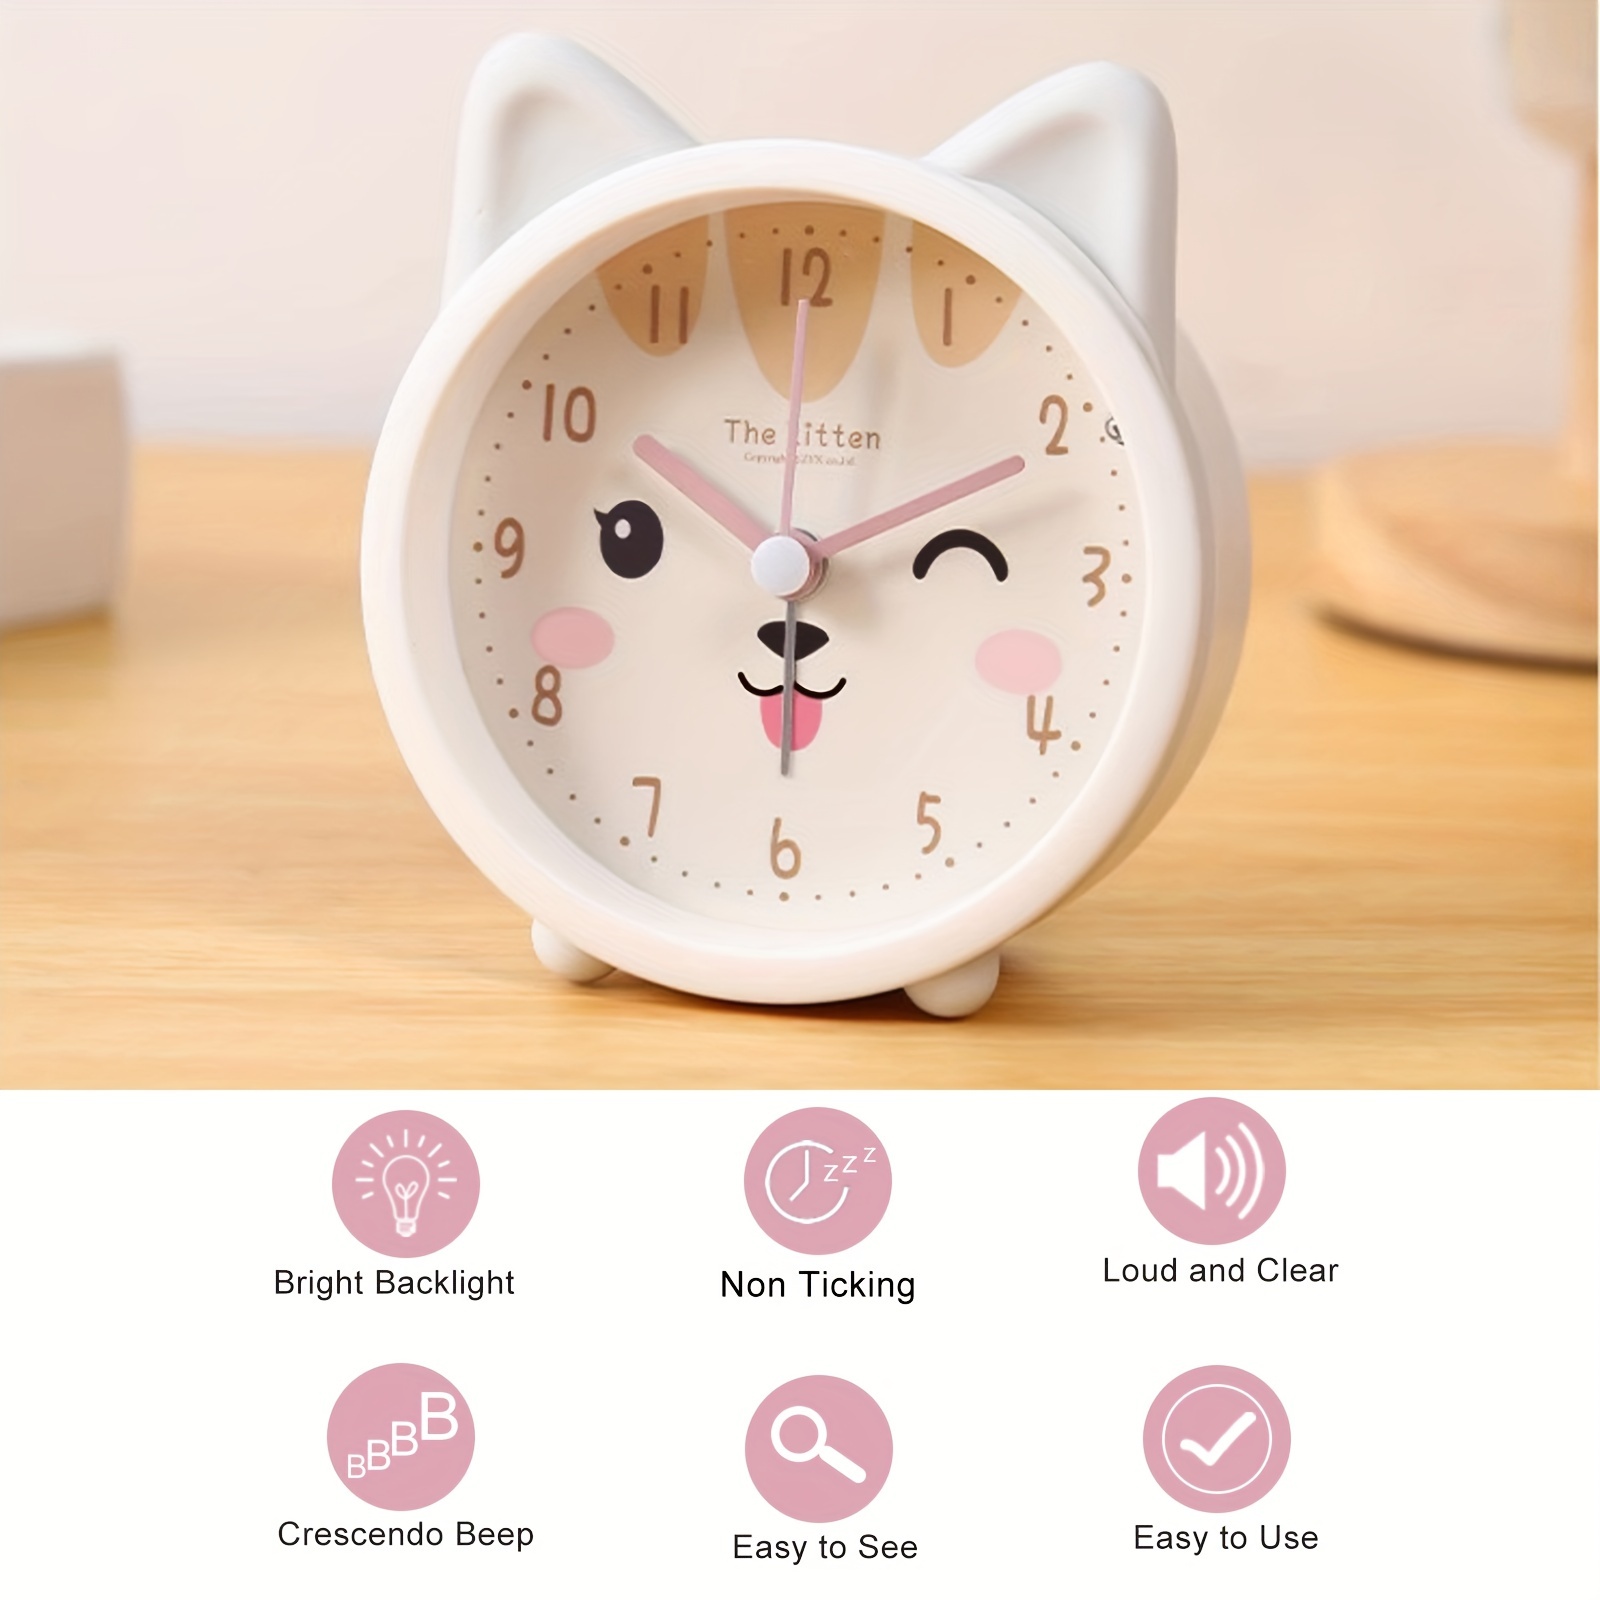 Silent Non-Ticking Battery Operated Shower Timer, NUOSWEK Waterproof Digital Timer, Small Size Cute Timer with Suction Cup (Pink)